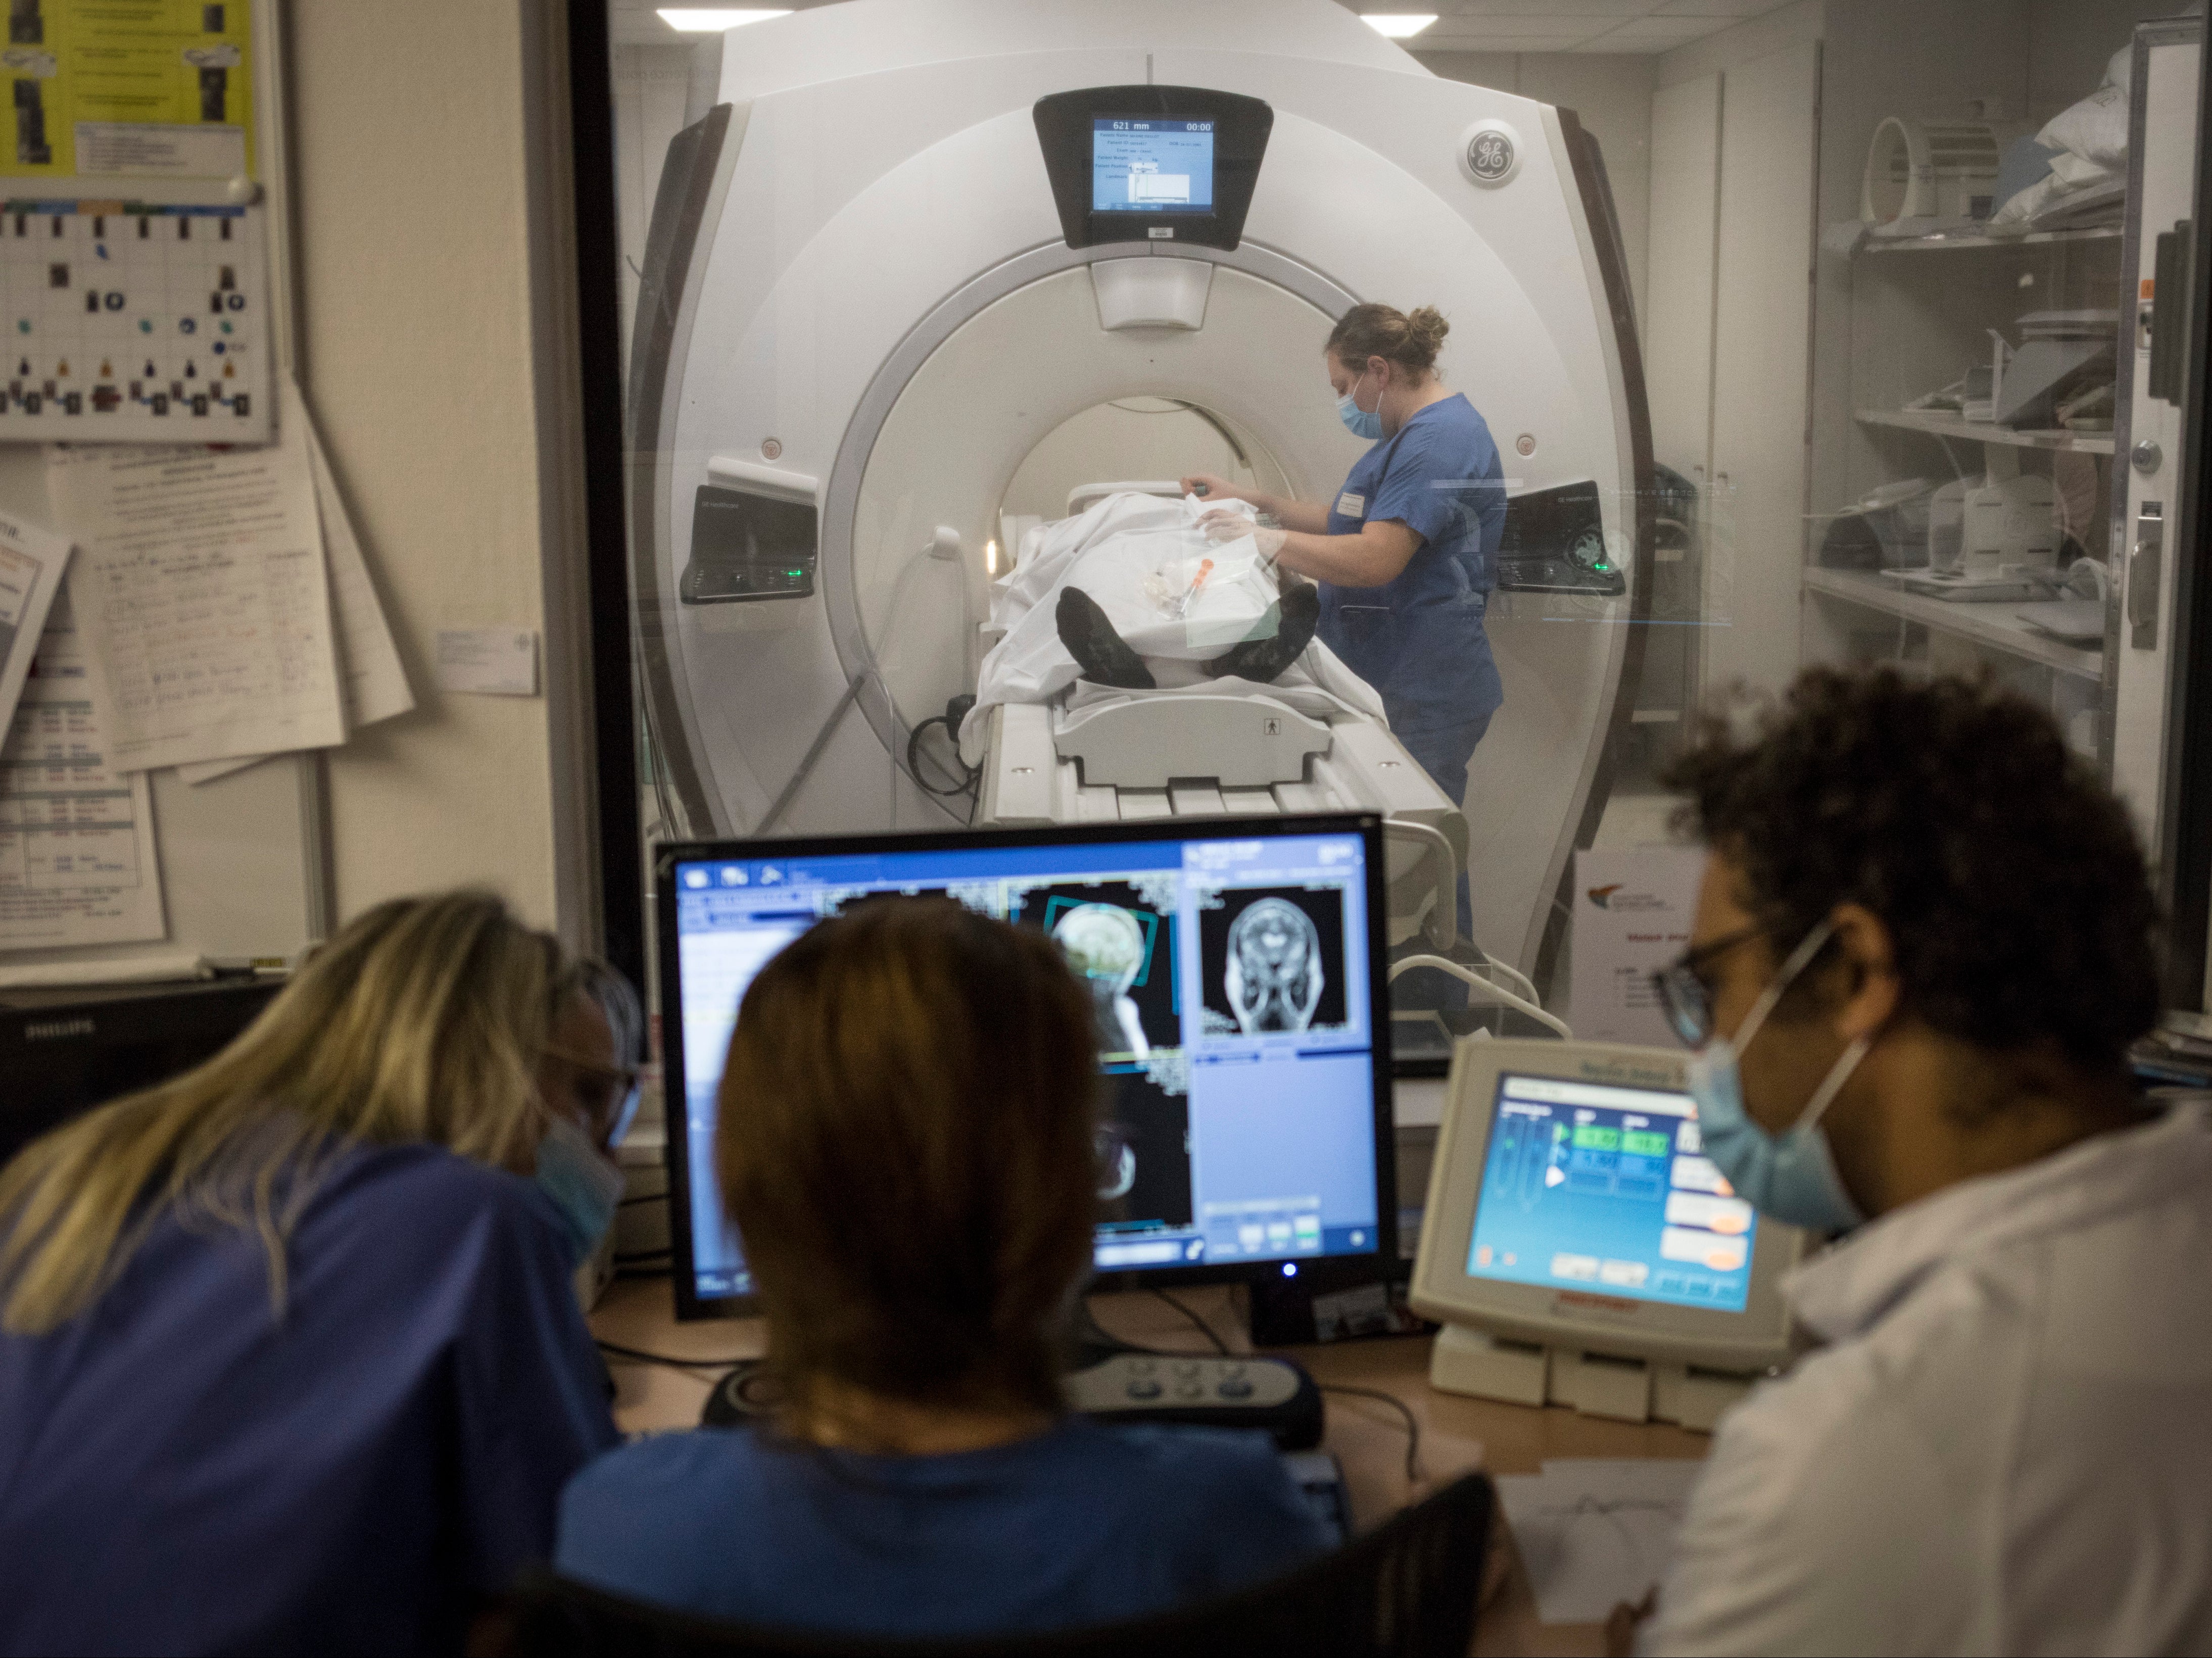 Volunteers underwent MRI (magnetic resonance imaging) as they learned and recalled a series of short stories